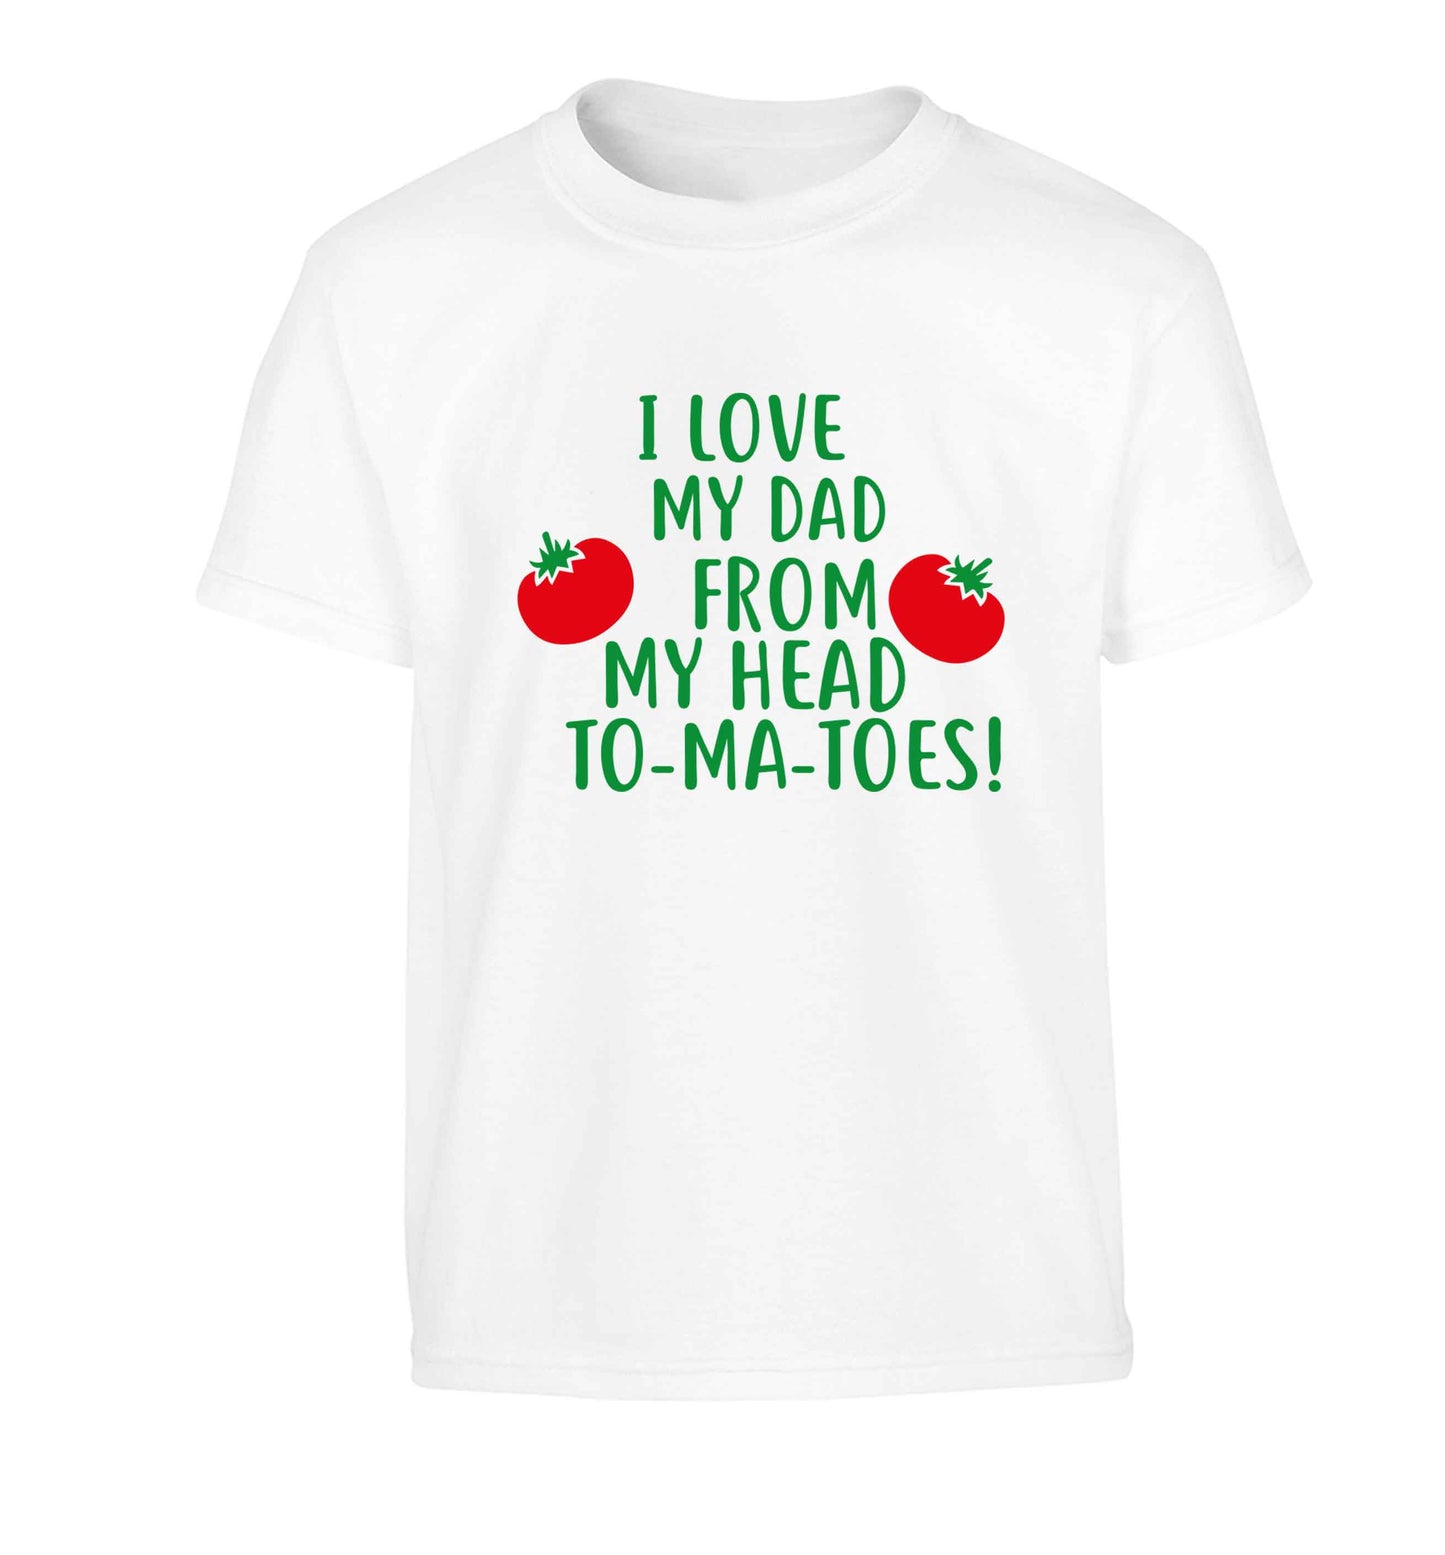 I love my dad from my head to-ma-toes Children's white Tshirt 12-13 Years